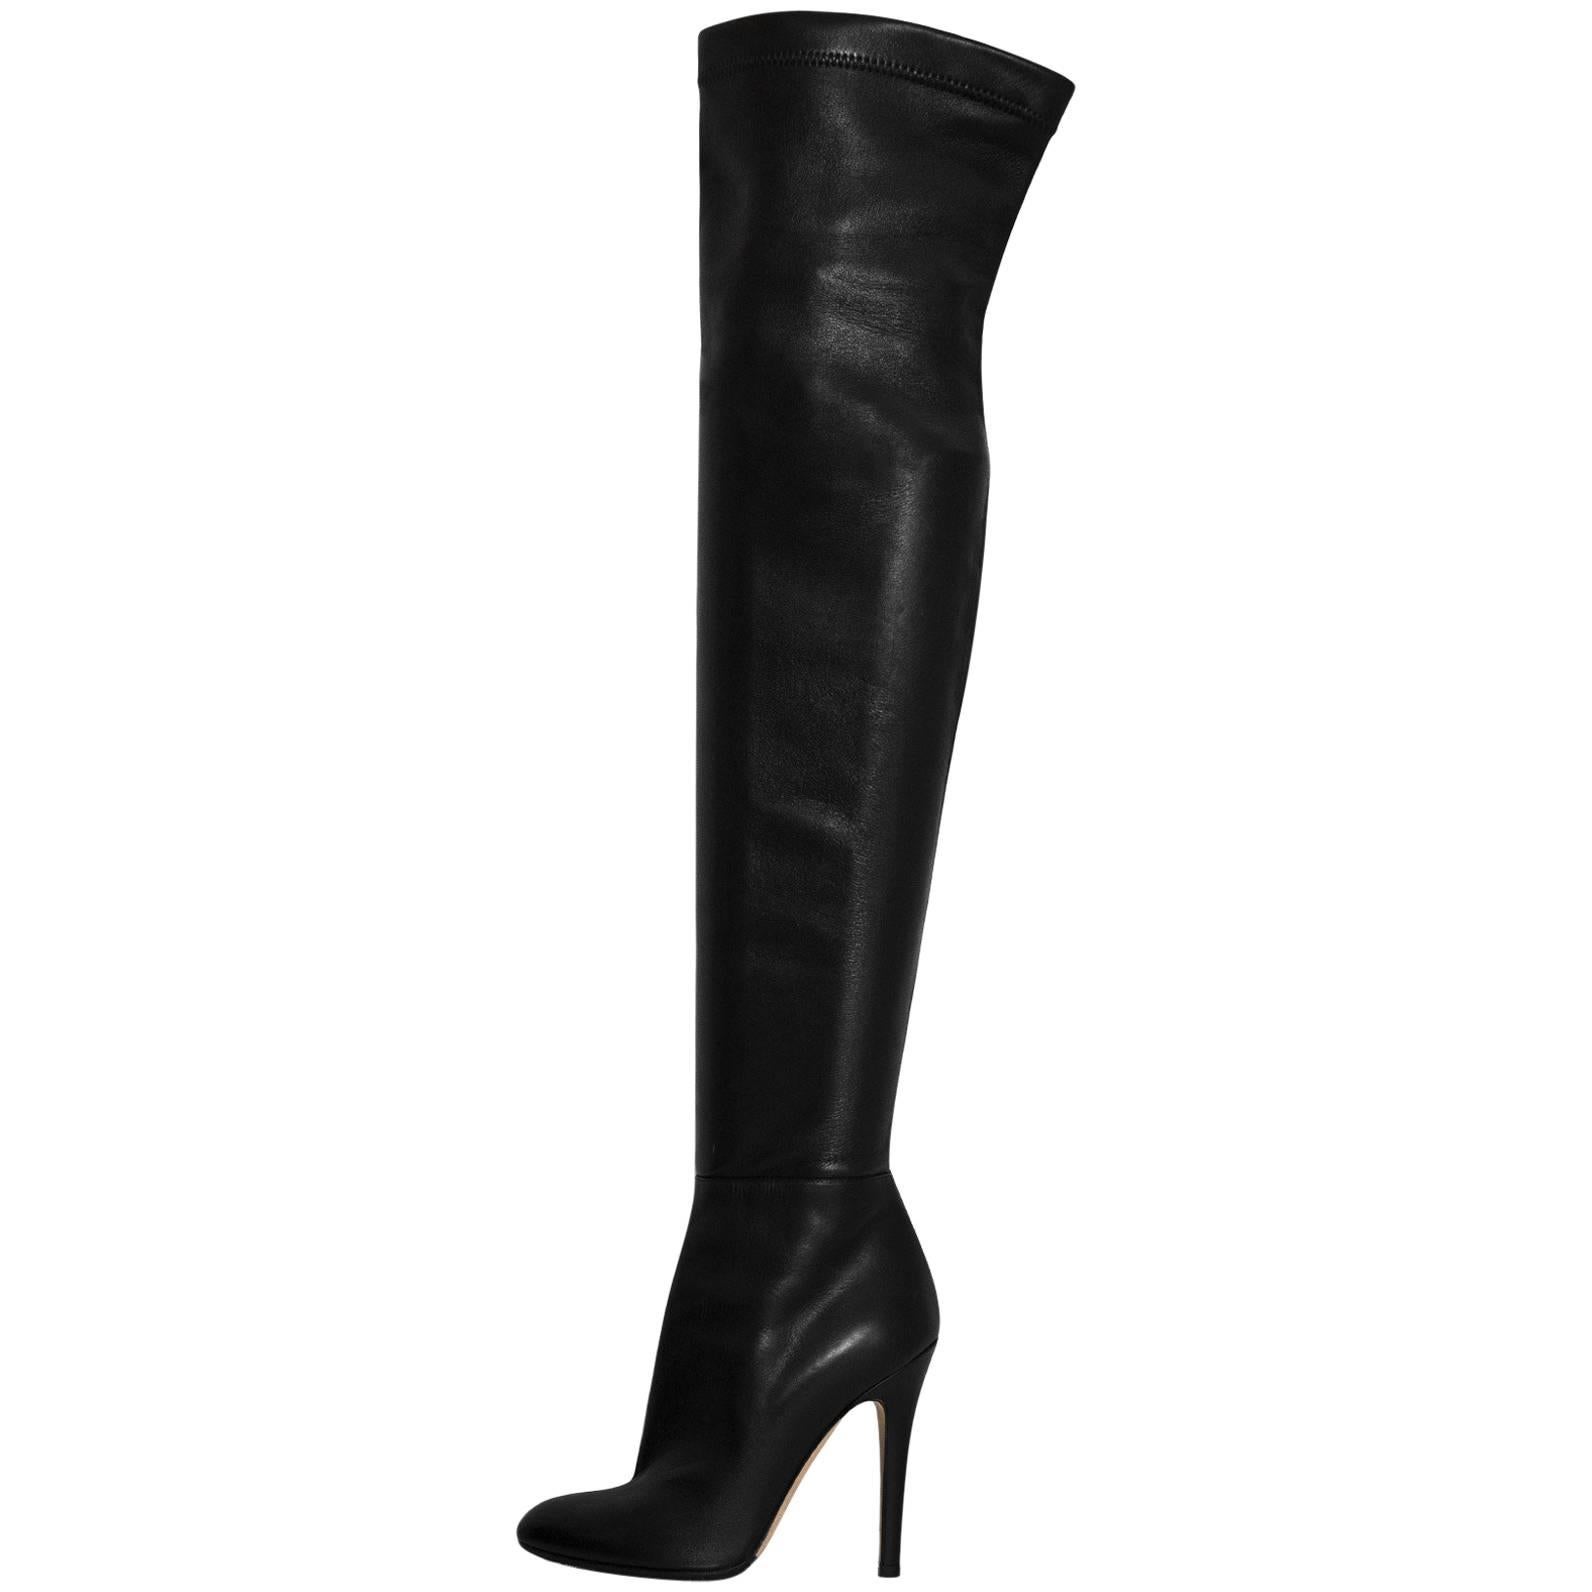 Jimmy Choo Black Calf Leather Turner Over-The-Knee Boots Sz 36